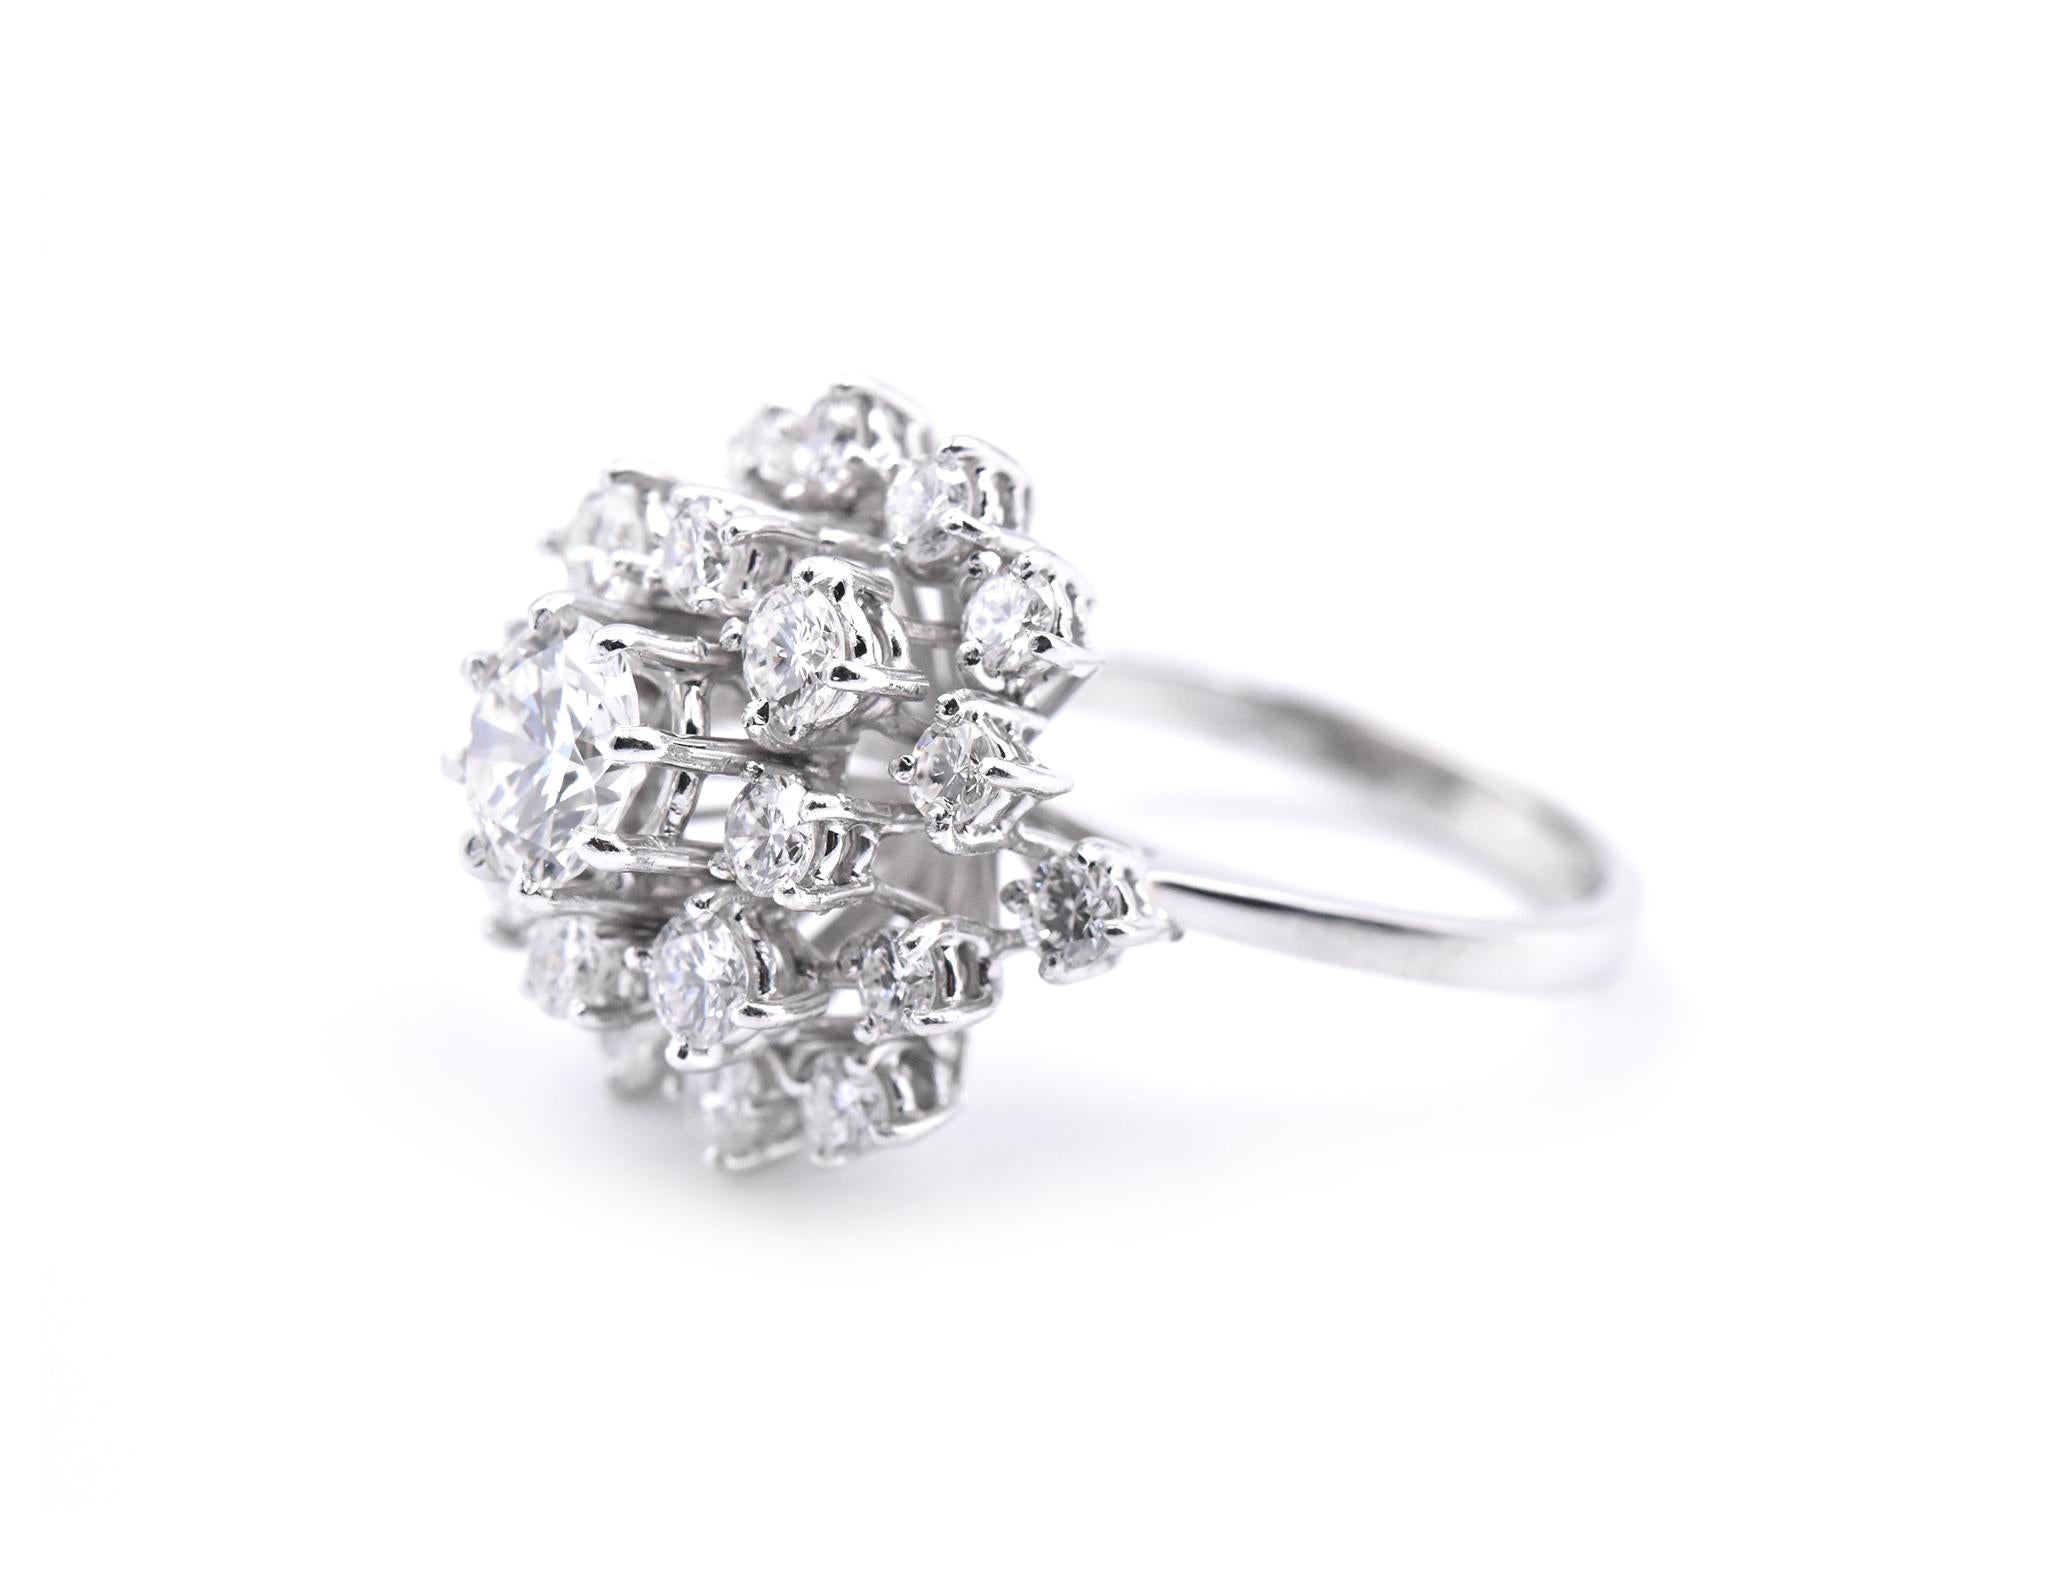 Designer: custom design
Material: 18k white gold
Center Diamond: round brilliant cut = 0.80ct
Color: F-G
Clarity: VS
Accent Diamonds: 22 round brilliant cuts = 1.35cttw
Color: F-G
Clarity: VS
Ring Size: 6 ¼ (please allow two additional shipping days